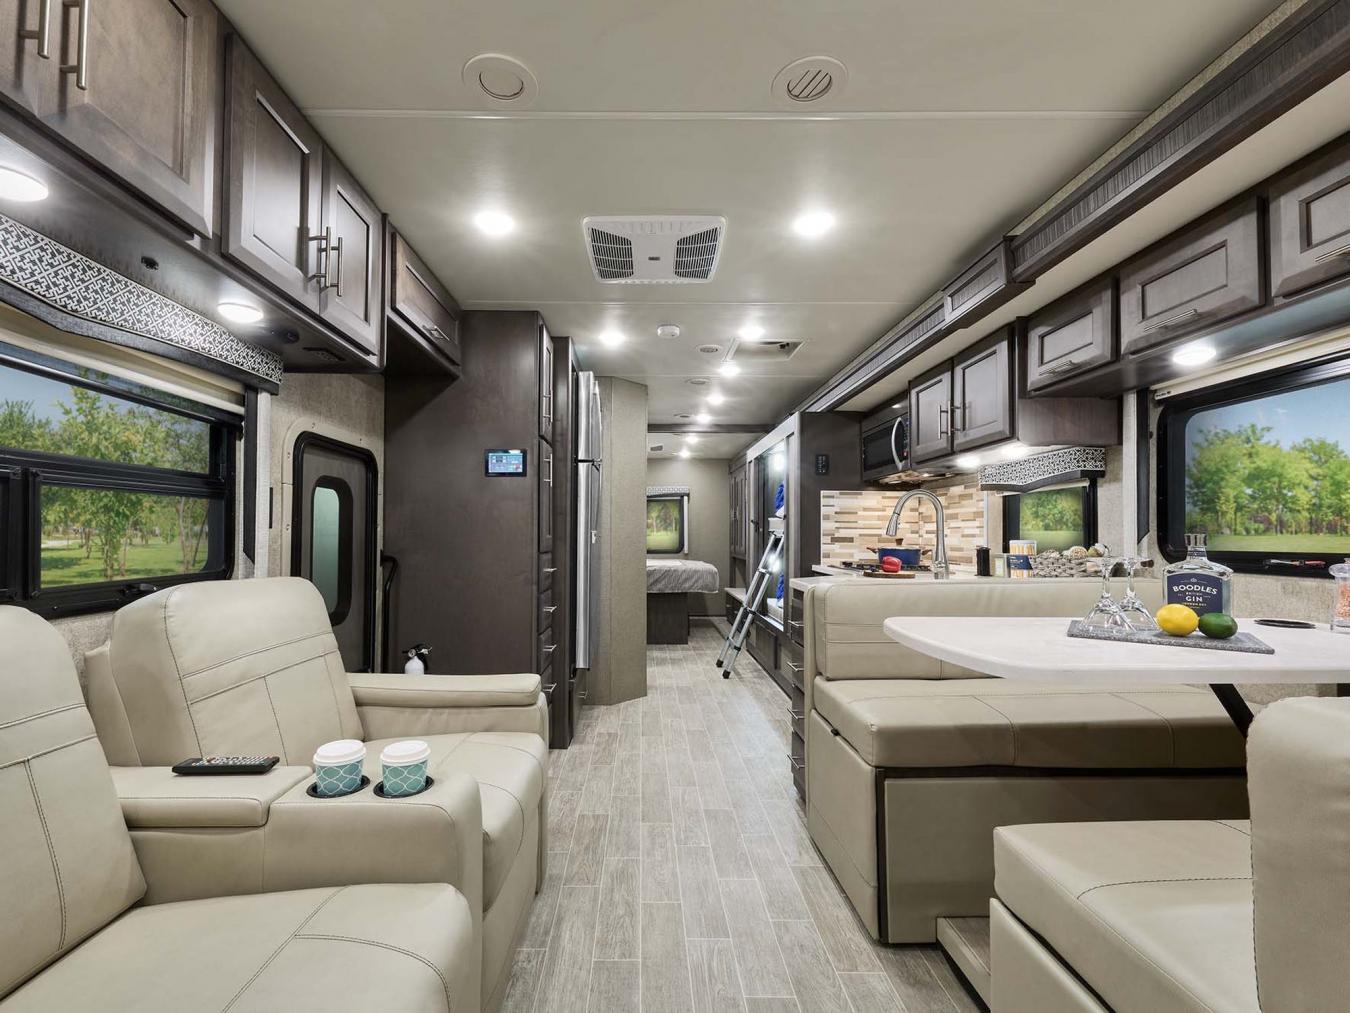 Spacious view of the interior of a new Thor Class A RV